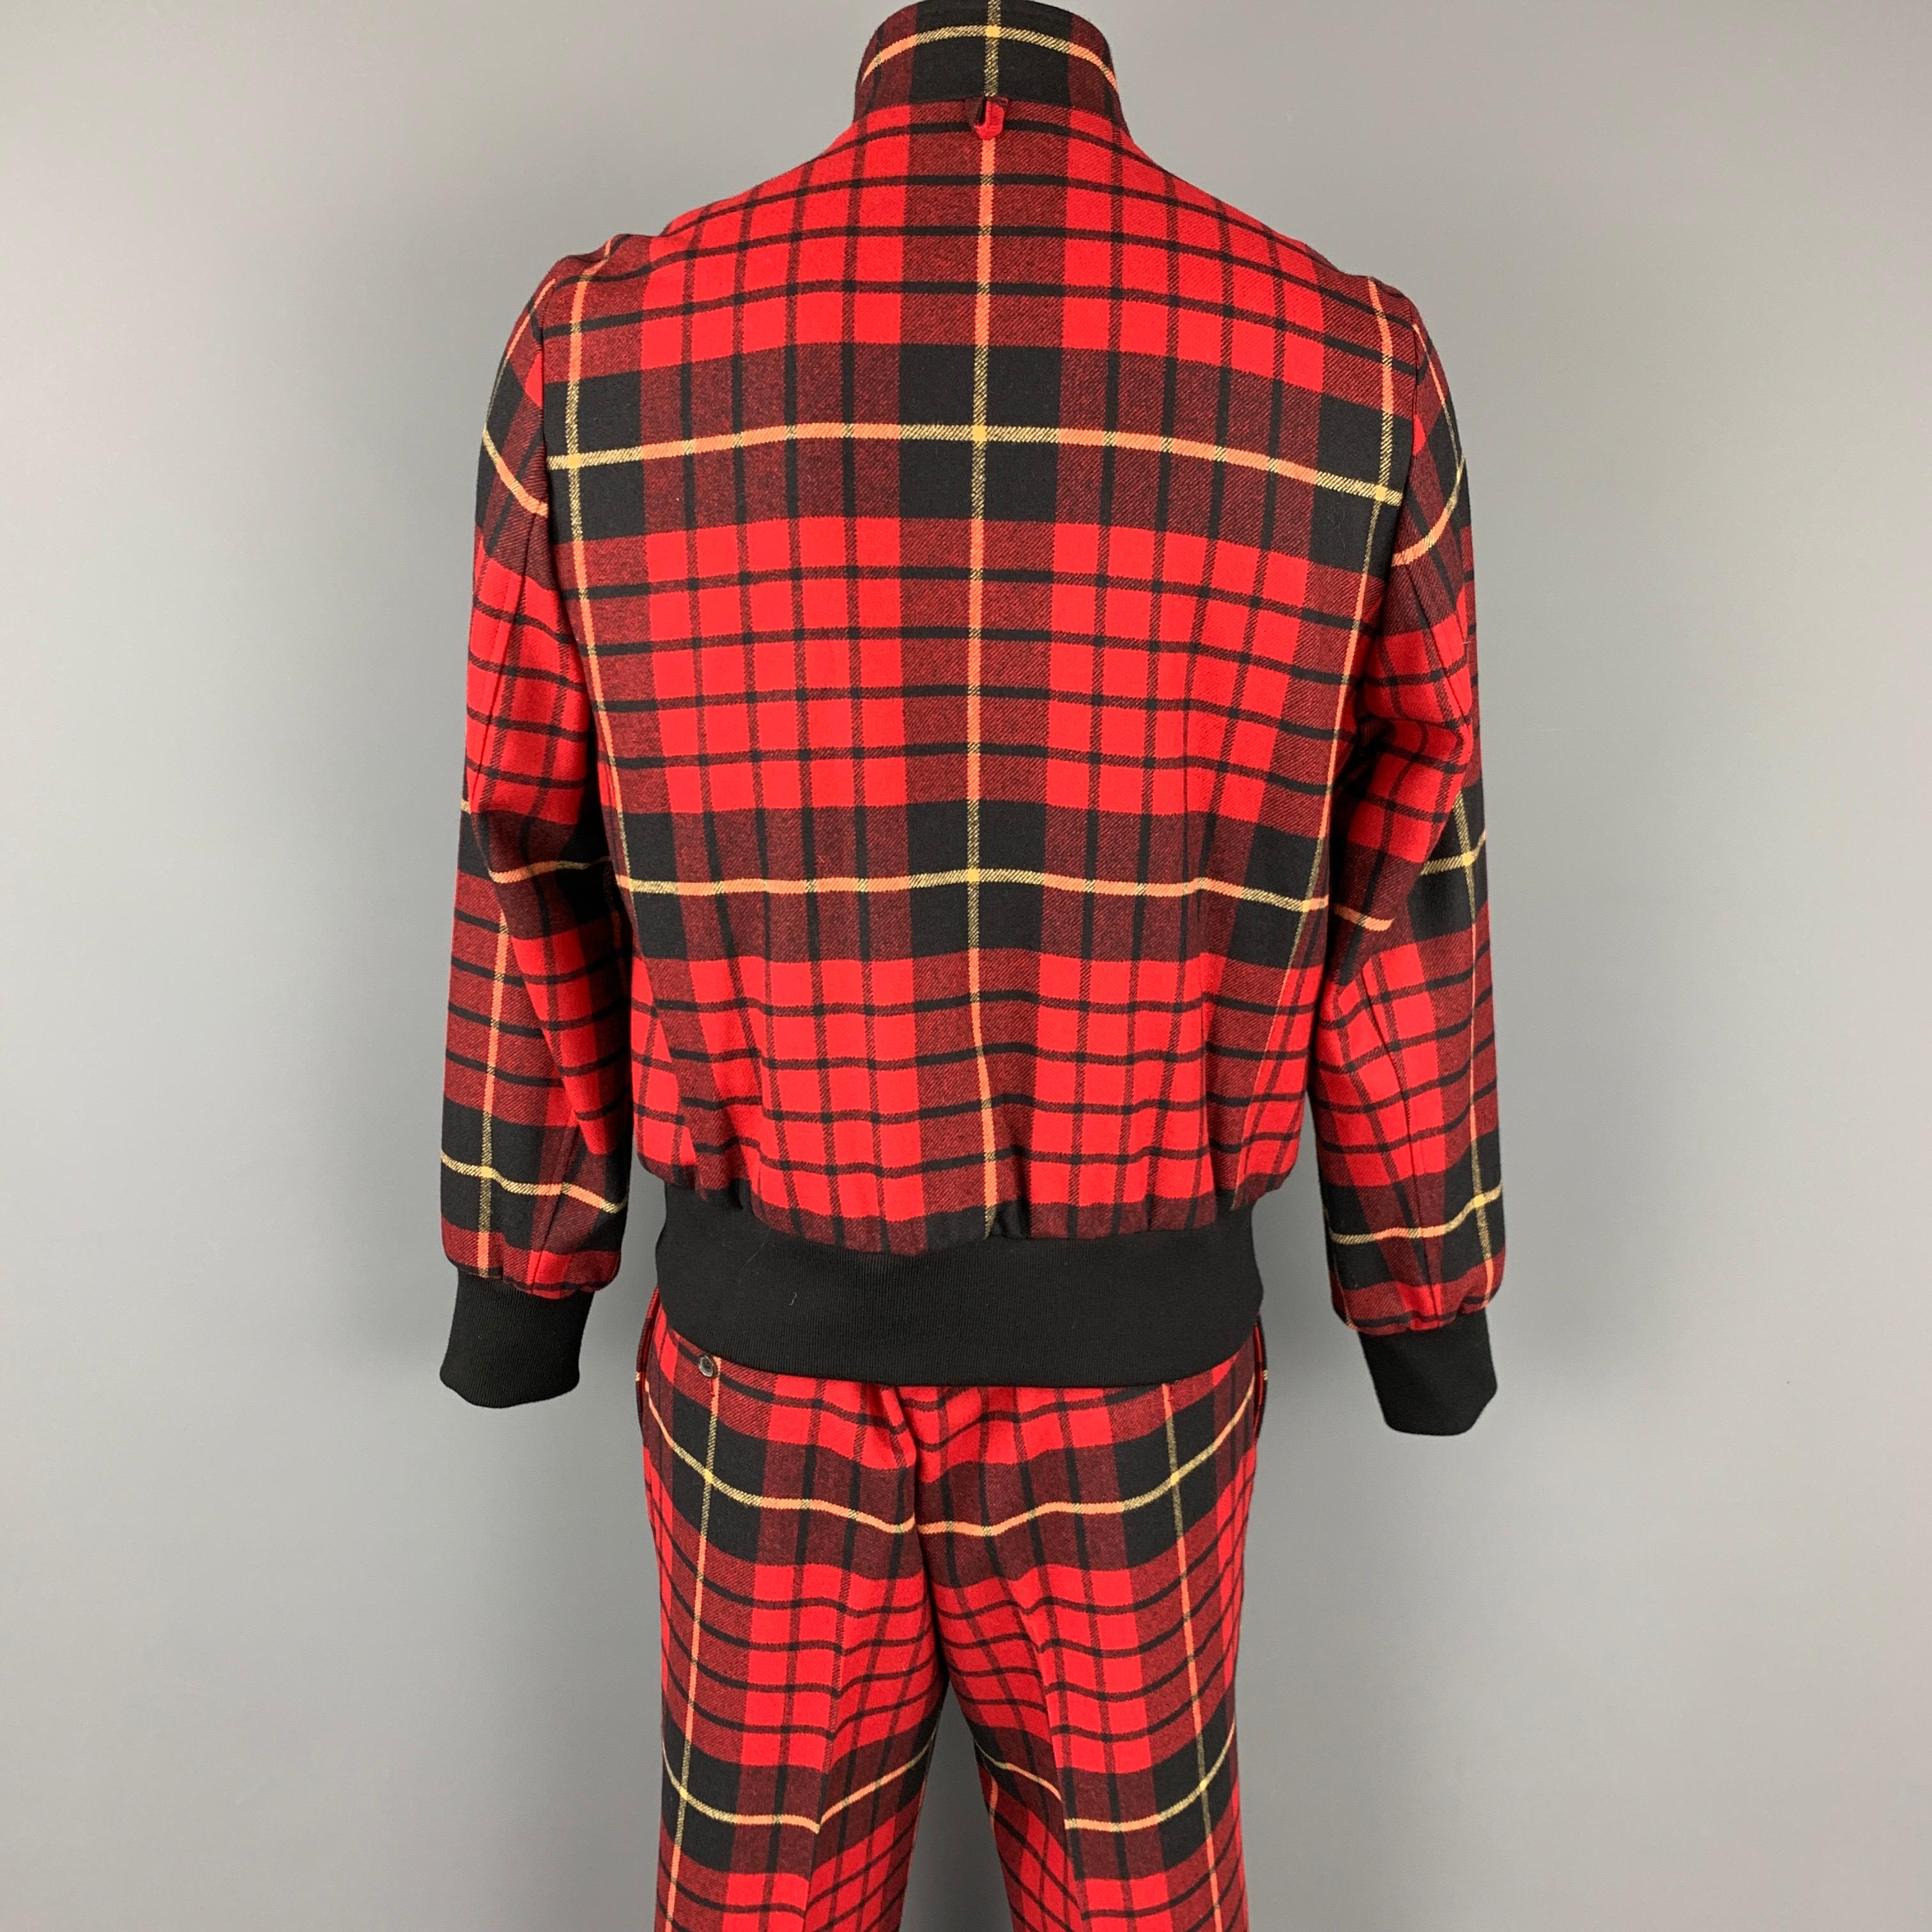 red and black plaid fleece jacket